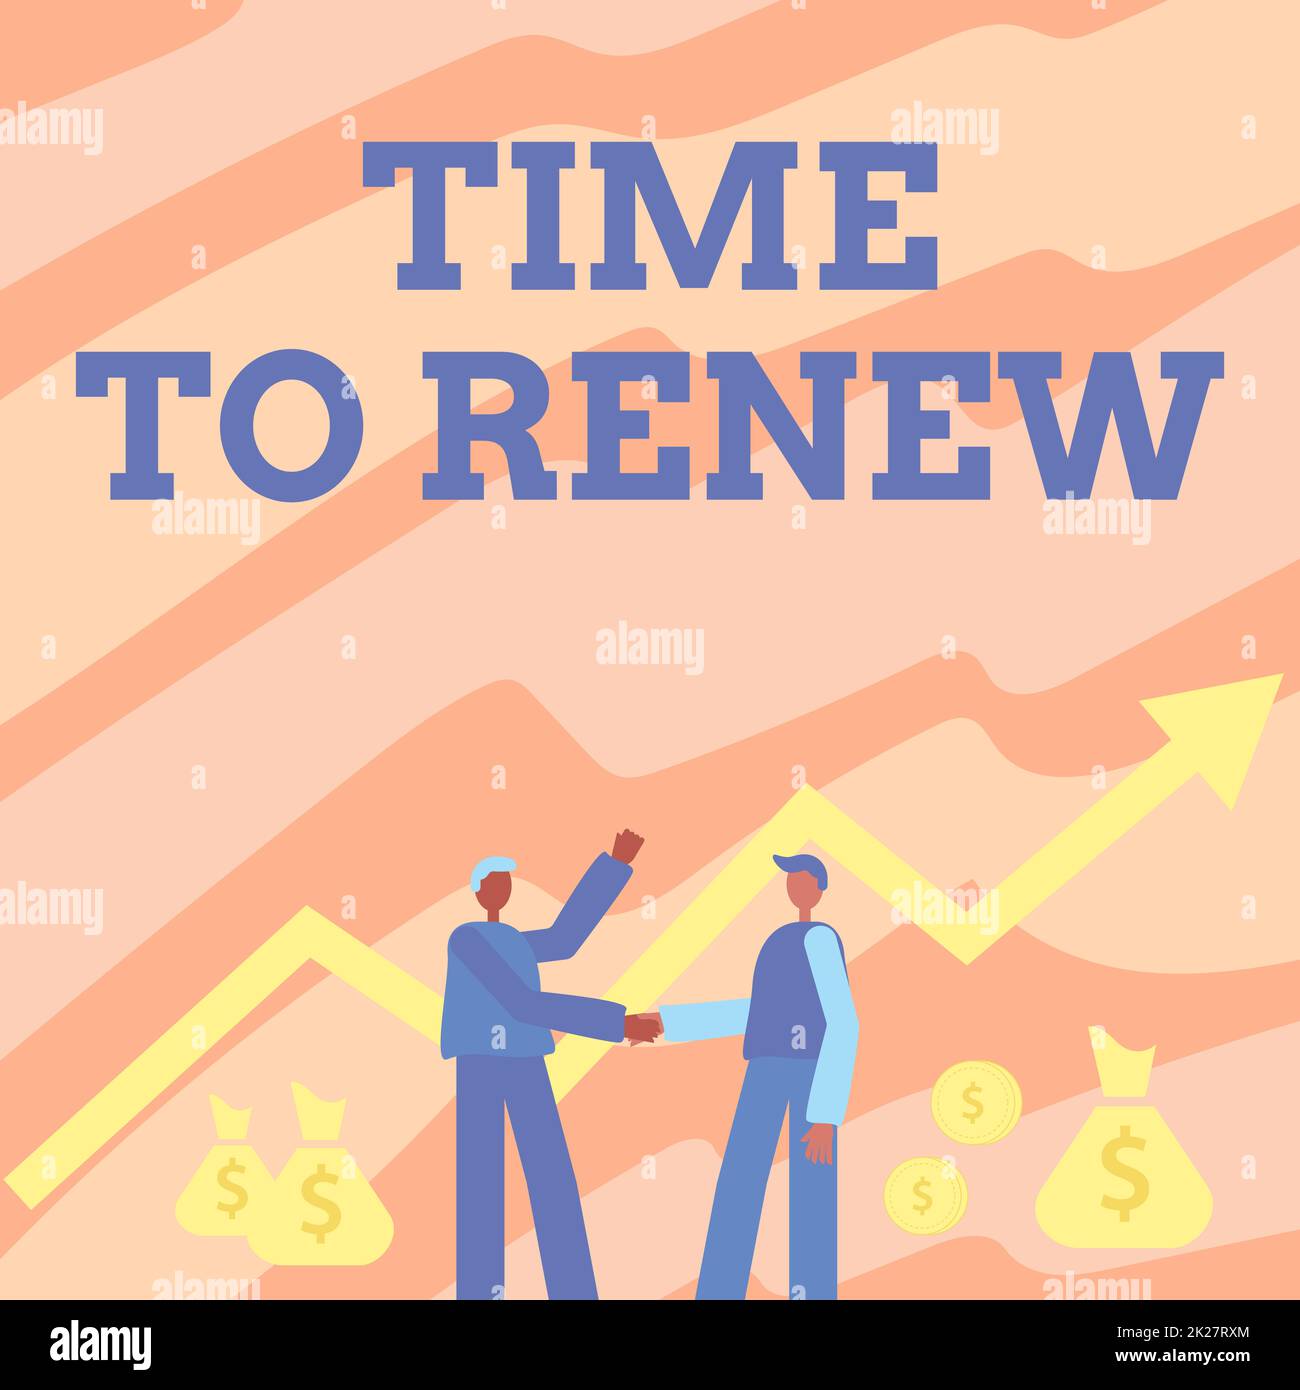 Sign displaying Time To Renew. Business concept extending the period of time when something is valid Two Men Standing Shaking Hands With Financial Arrow For Growth And Money Bags. Stock Photo